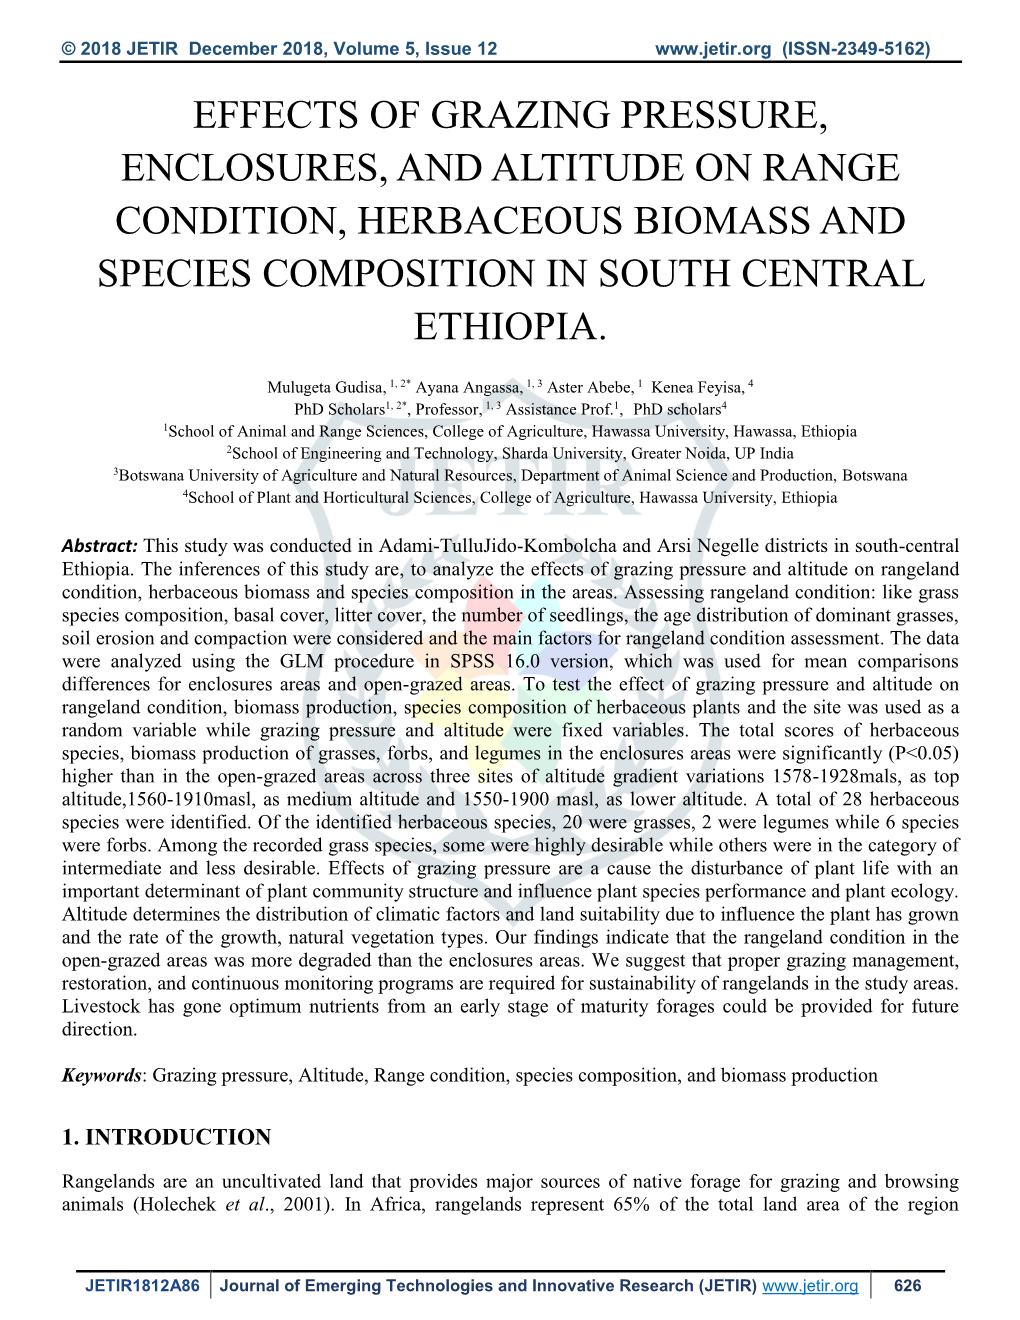 Effects of Grazing Pressure, Enclosures, and Altitude on Range Condition, Herbaceous Biomass and Species Composition in South Central Ethiopia